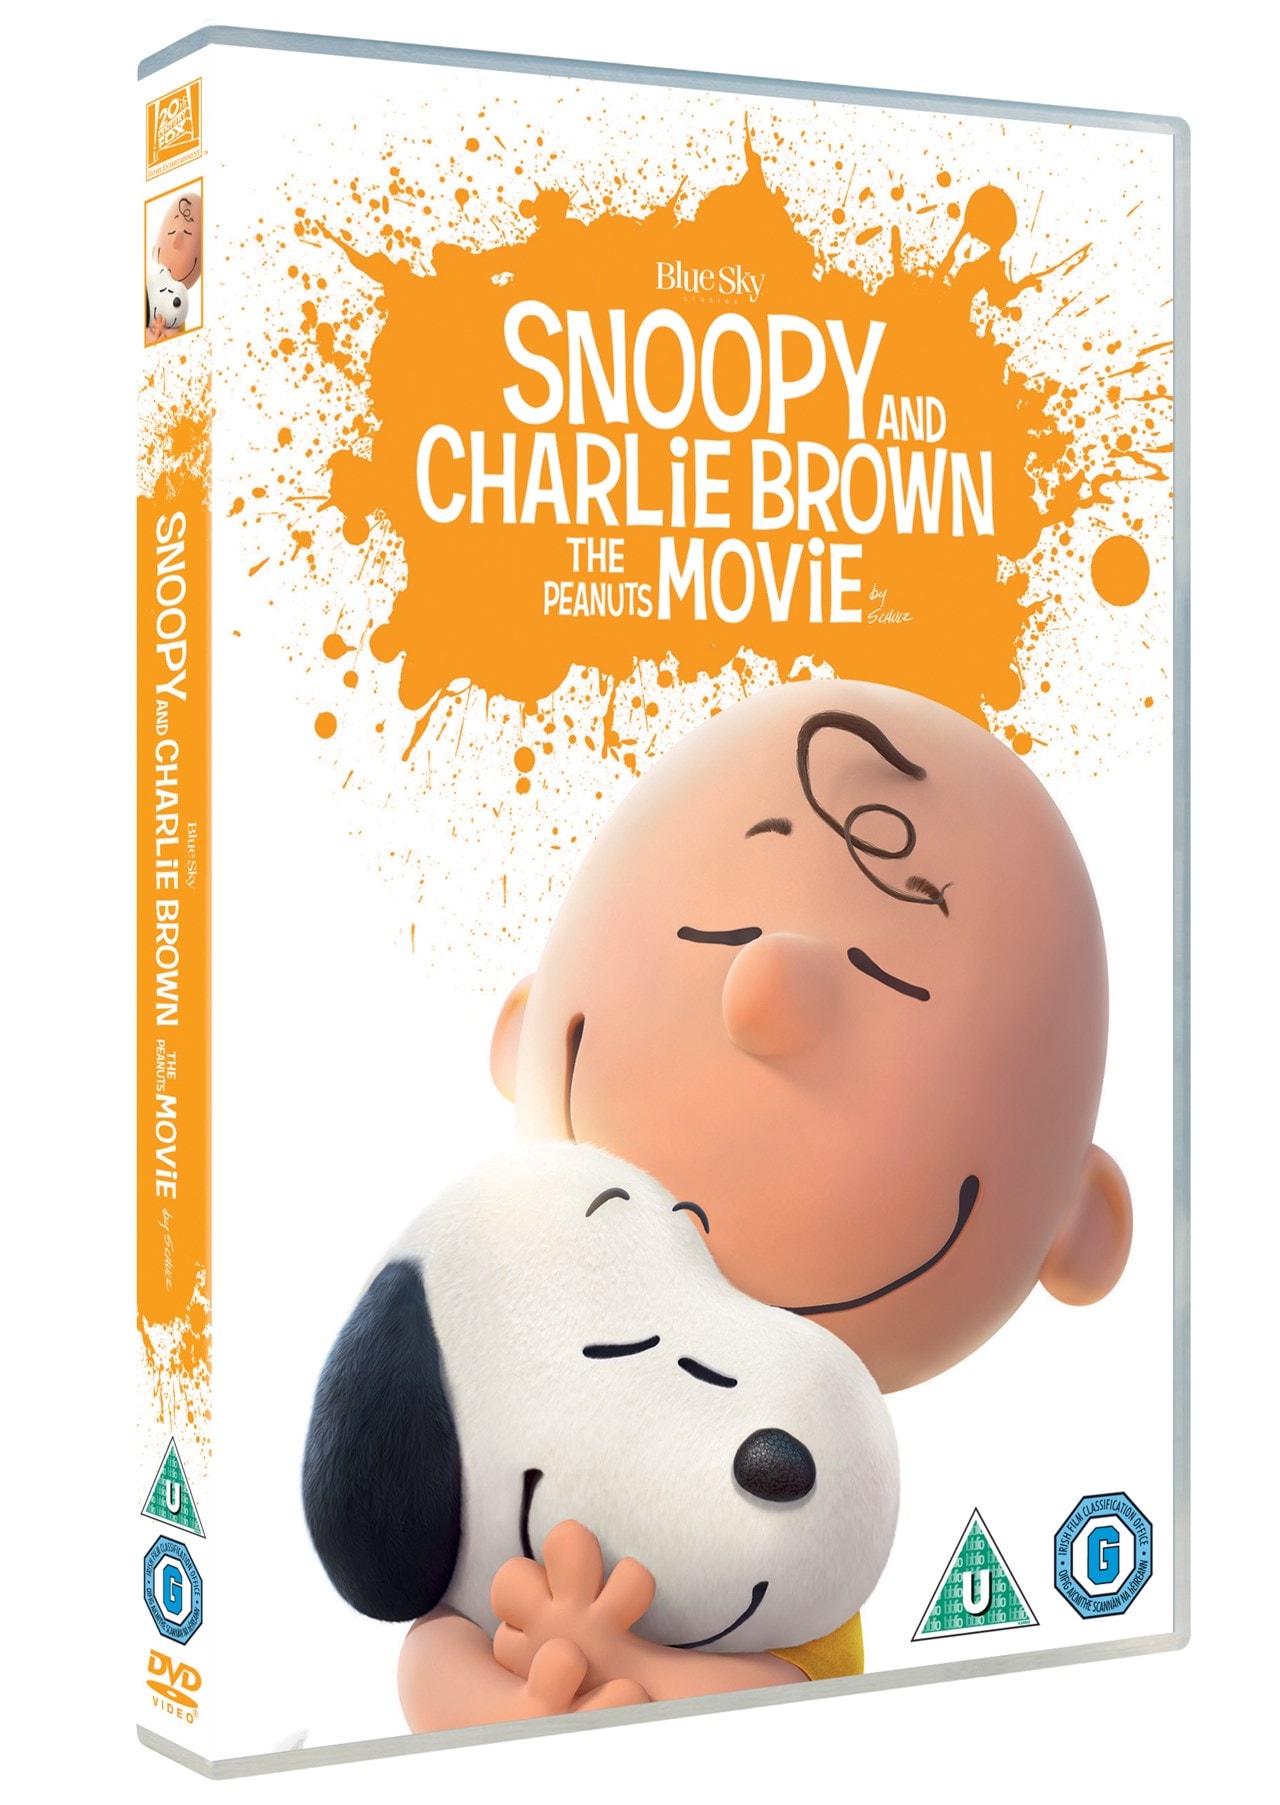 Snoopy And Charlie Brown The Peanuts Movie Dvd Free Shipping Over Hmv Store